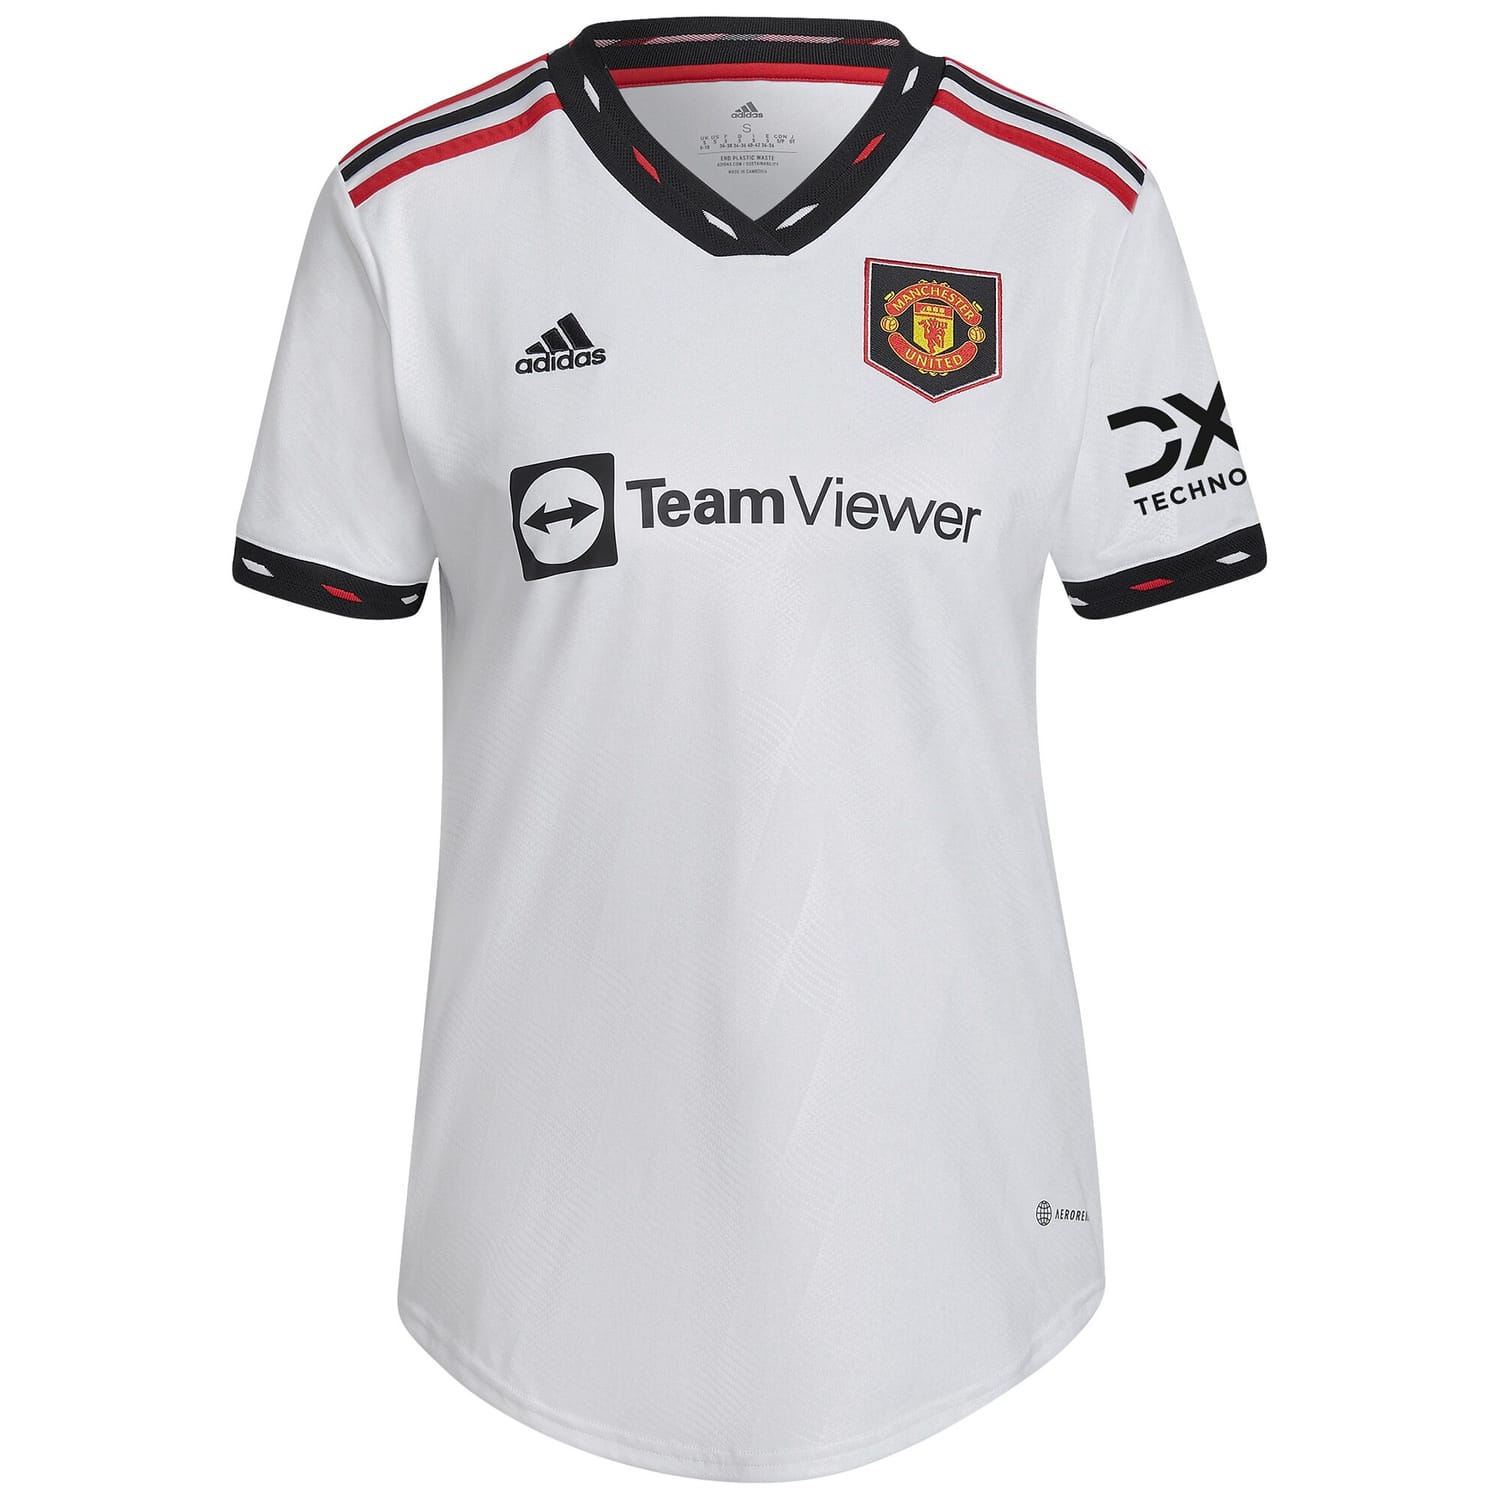 Premier League Manchester United Away Cup Jersey Shirt 2022-23 player Facundo Pellistri 28 printing for Women